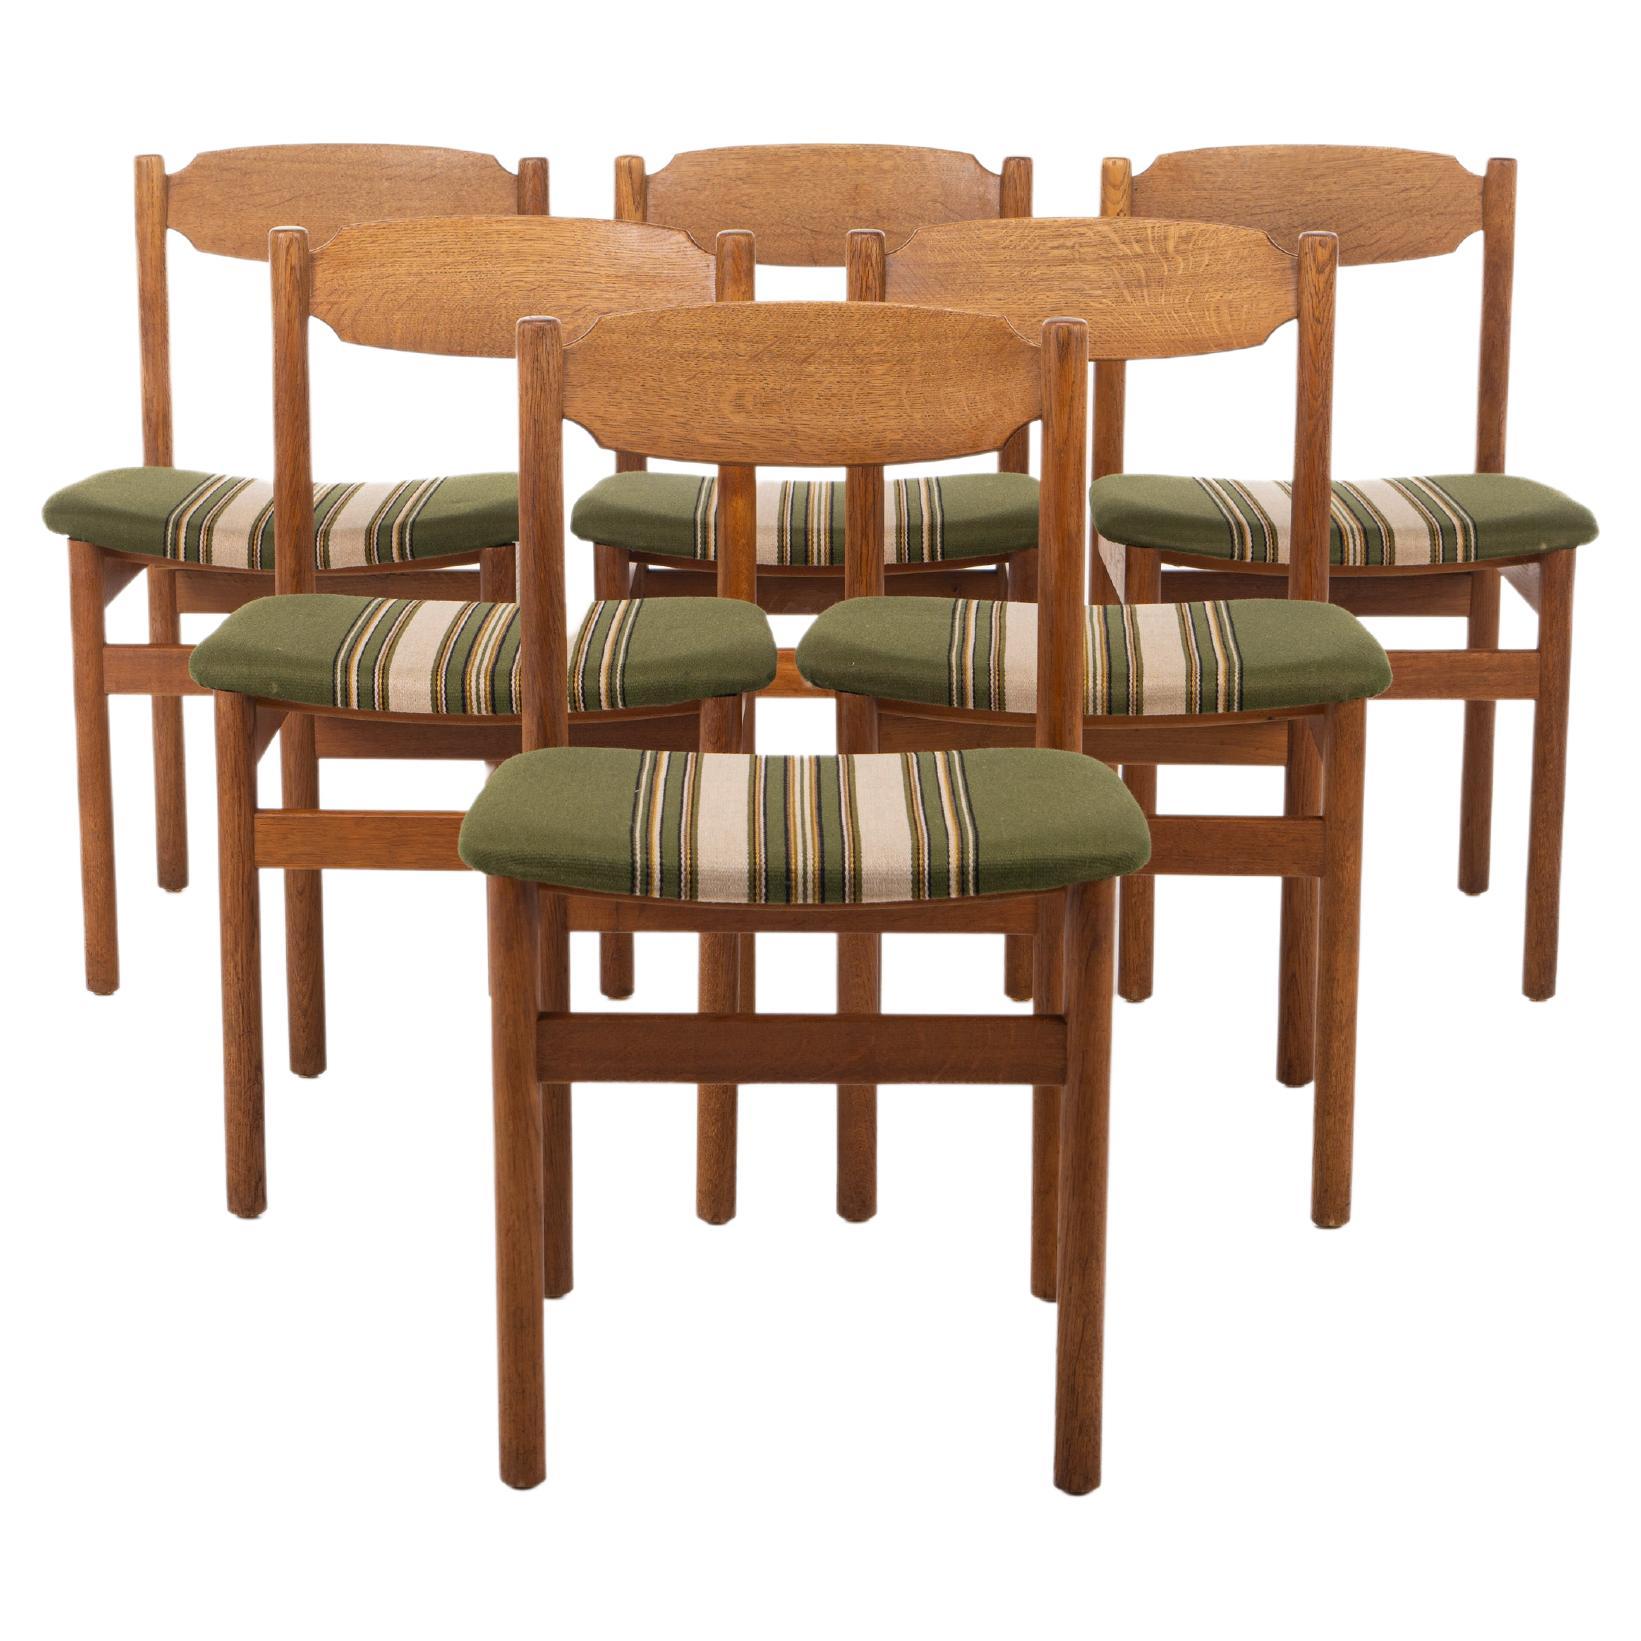 Set of 6 Vintage Dining Chairs in Oak